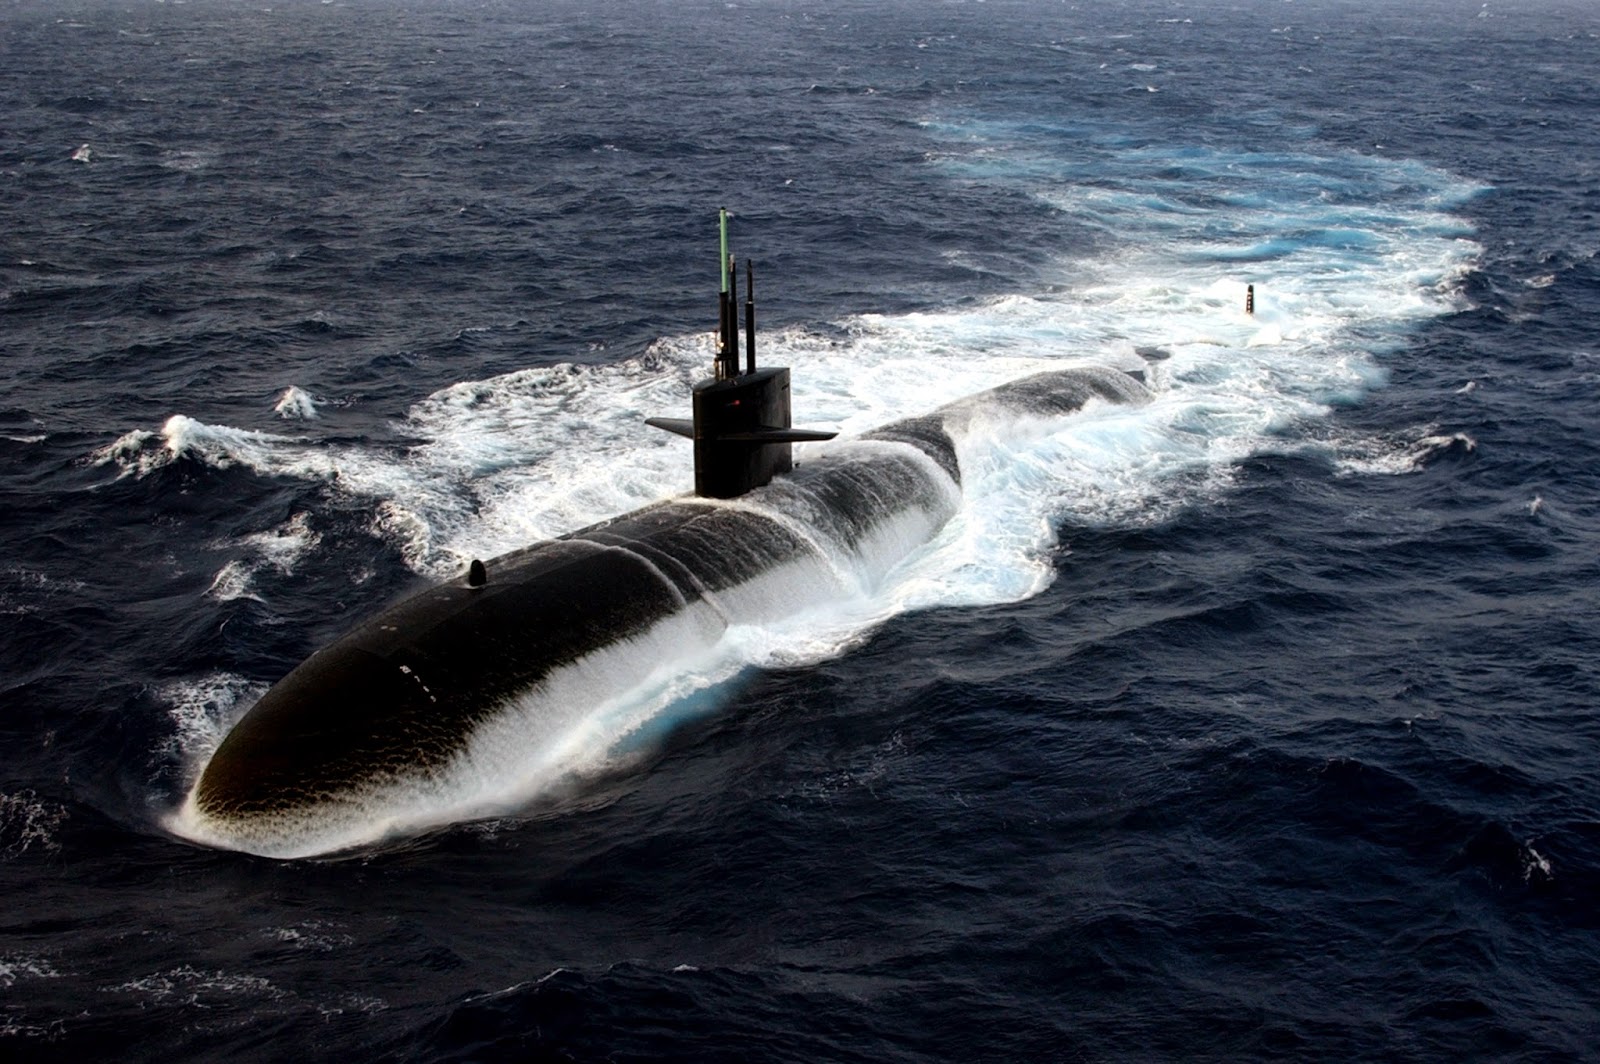 US_Navy_040712-N-0119G-002_The_Los_Angeles-class_submarine_USS_Albuquerque_(SSN_706)_surfaces_in_the_Atlantic_Ocean_while_participating_in_Majestic_Eagle_2004%2B%2BU.S.%2BNavy%2Bphoto%2Bby%2BPhotographer's%2BMate%2BAirman%2BRob%2BGaston.jpg